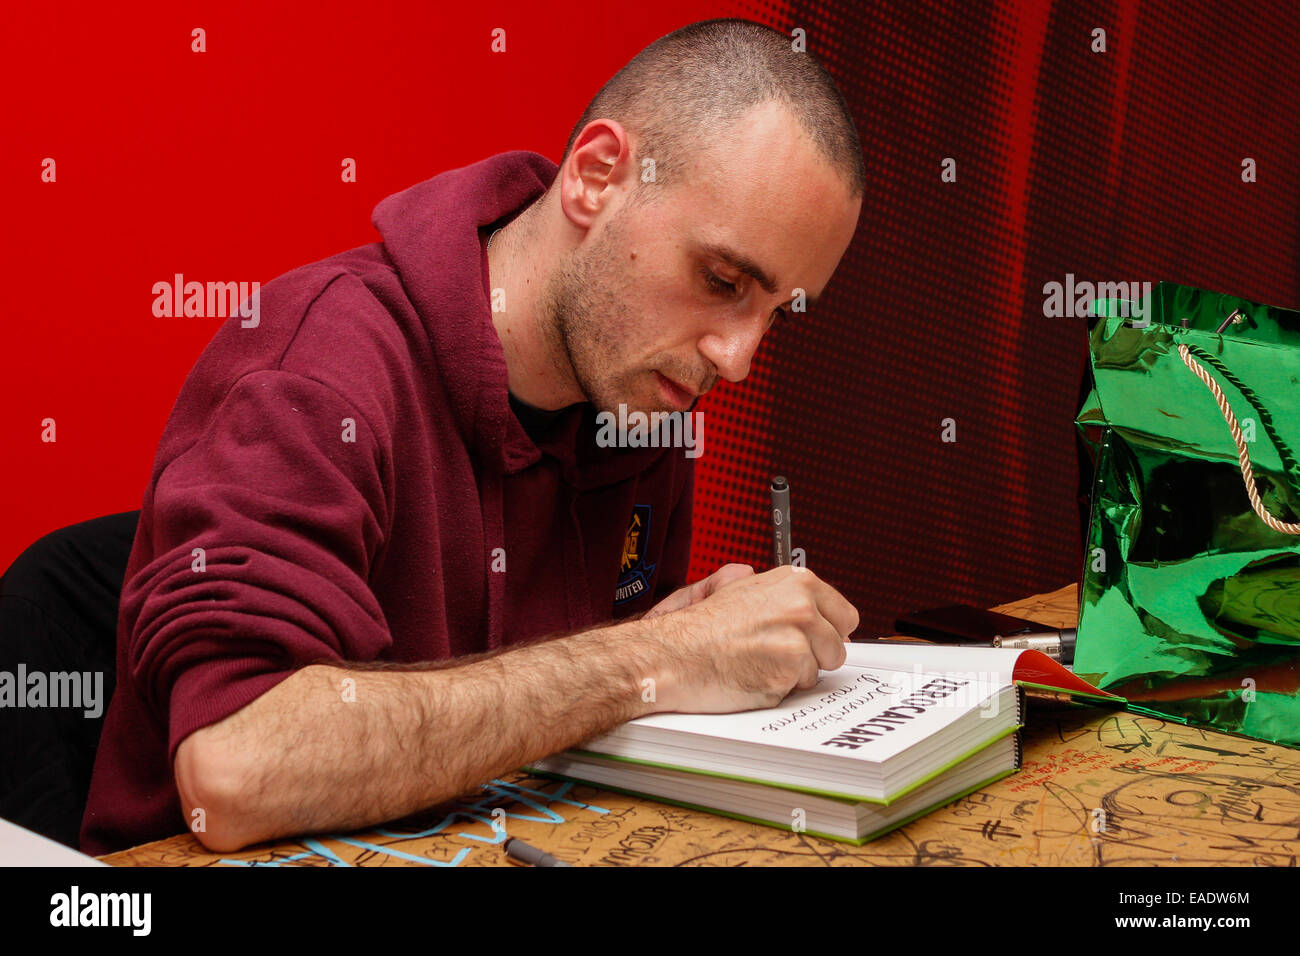 Zerocalcare (aka Michele Rech), the Italian cartoonist most followed at the moment, met his fans at the Feltrinelli library for autographs with a drawing his latest work 'Dimentica il mio nome'. © Elena Aquila/Pacific Press/Alamy Live News Stock Photo